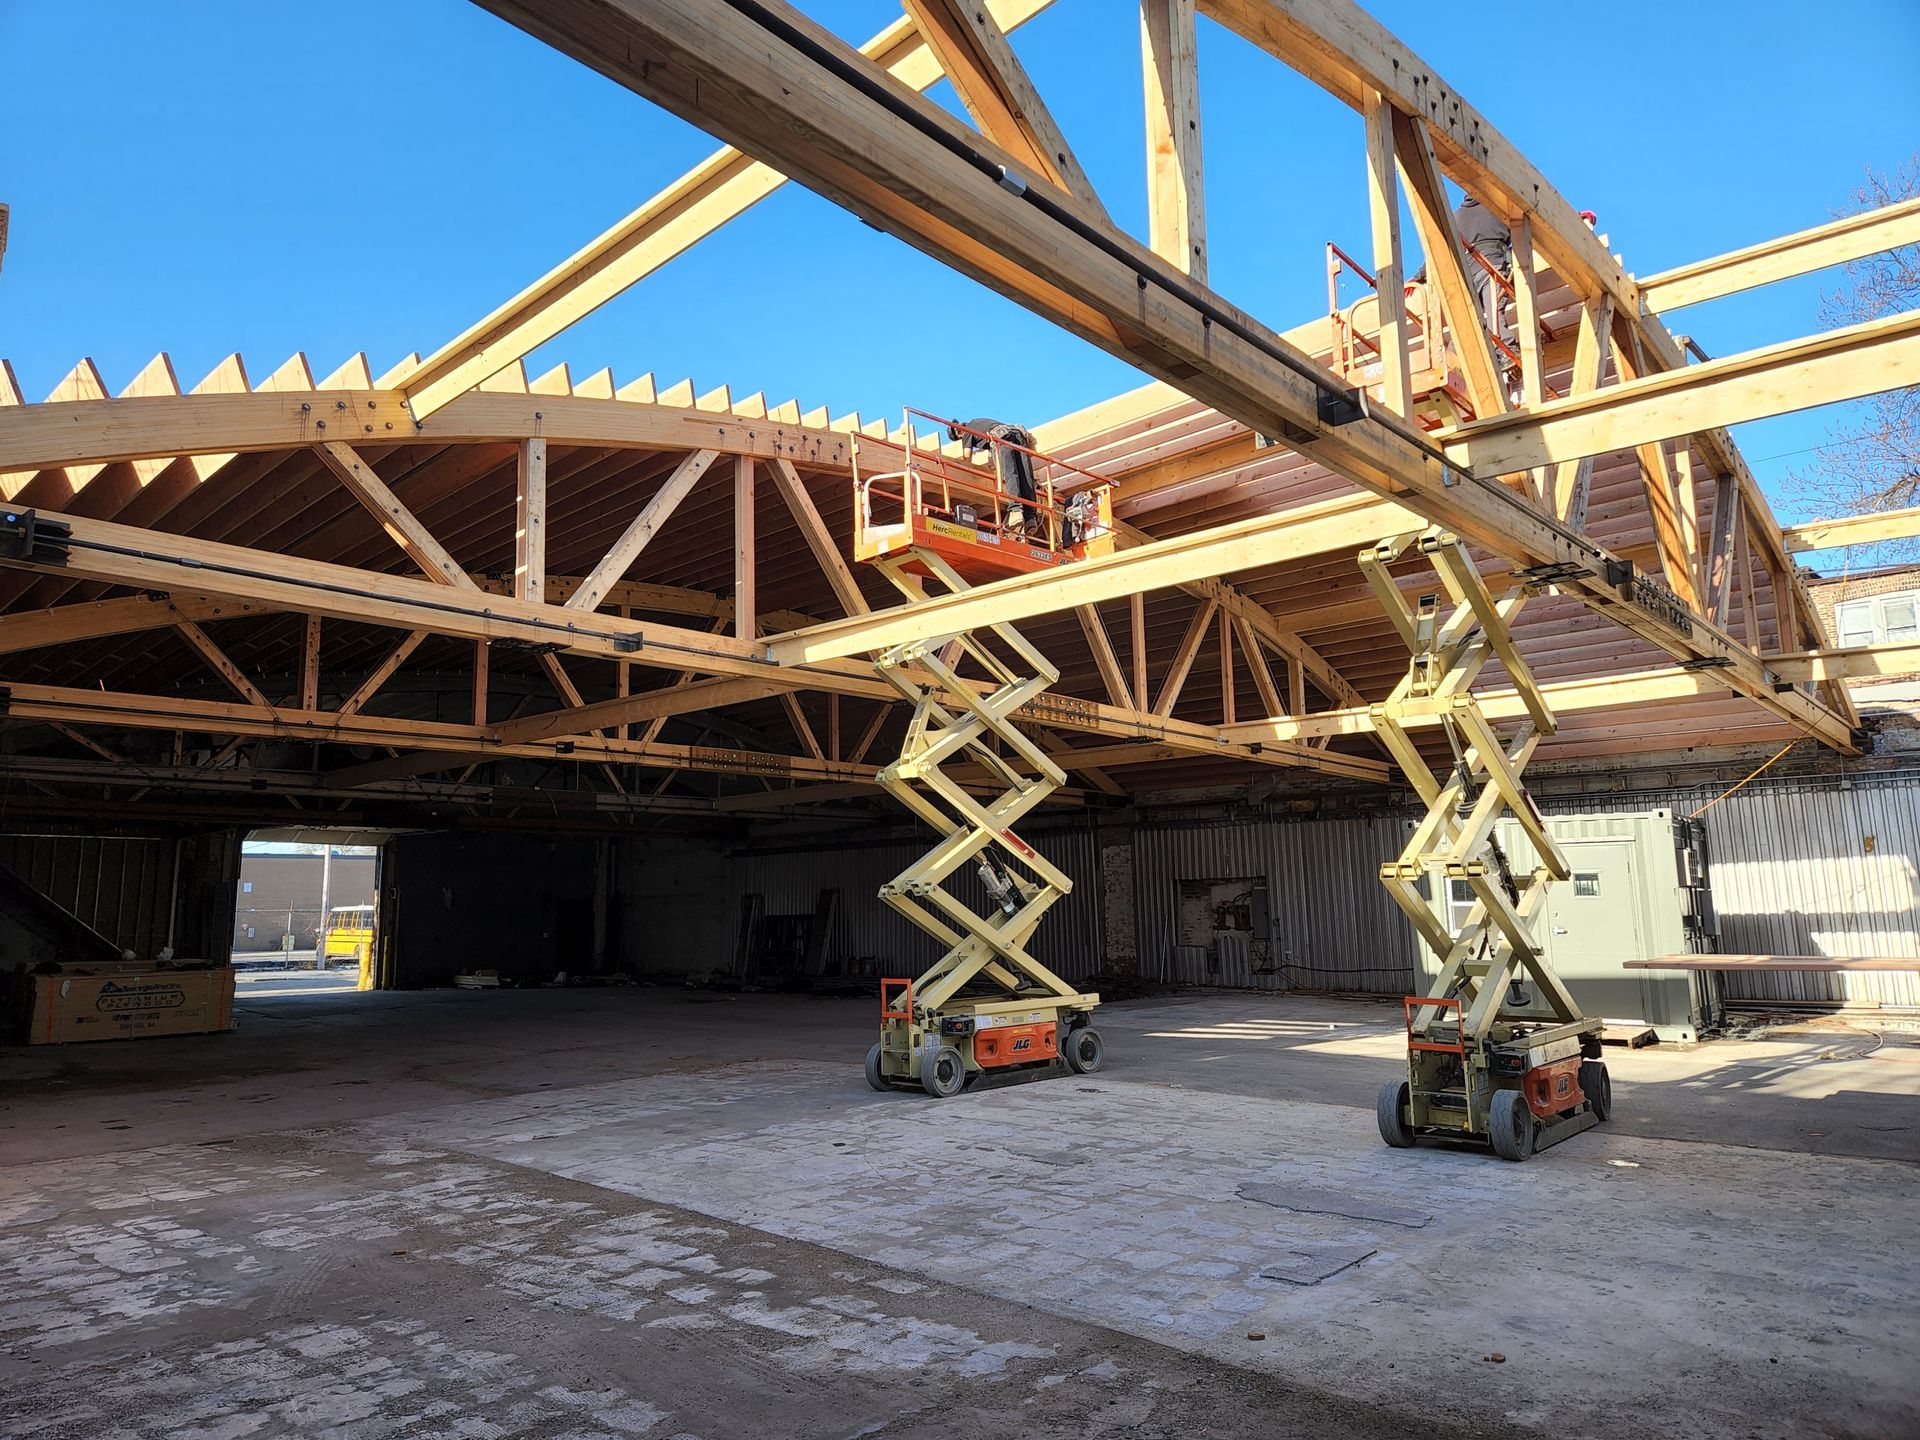 A construction site with a lot of wooden beams and scissor lifts.